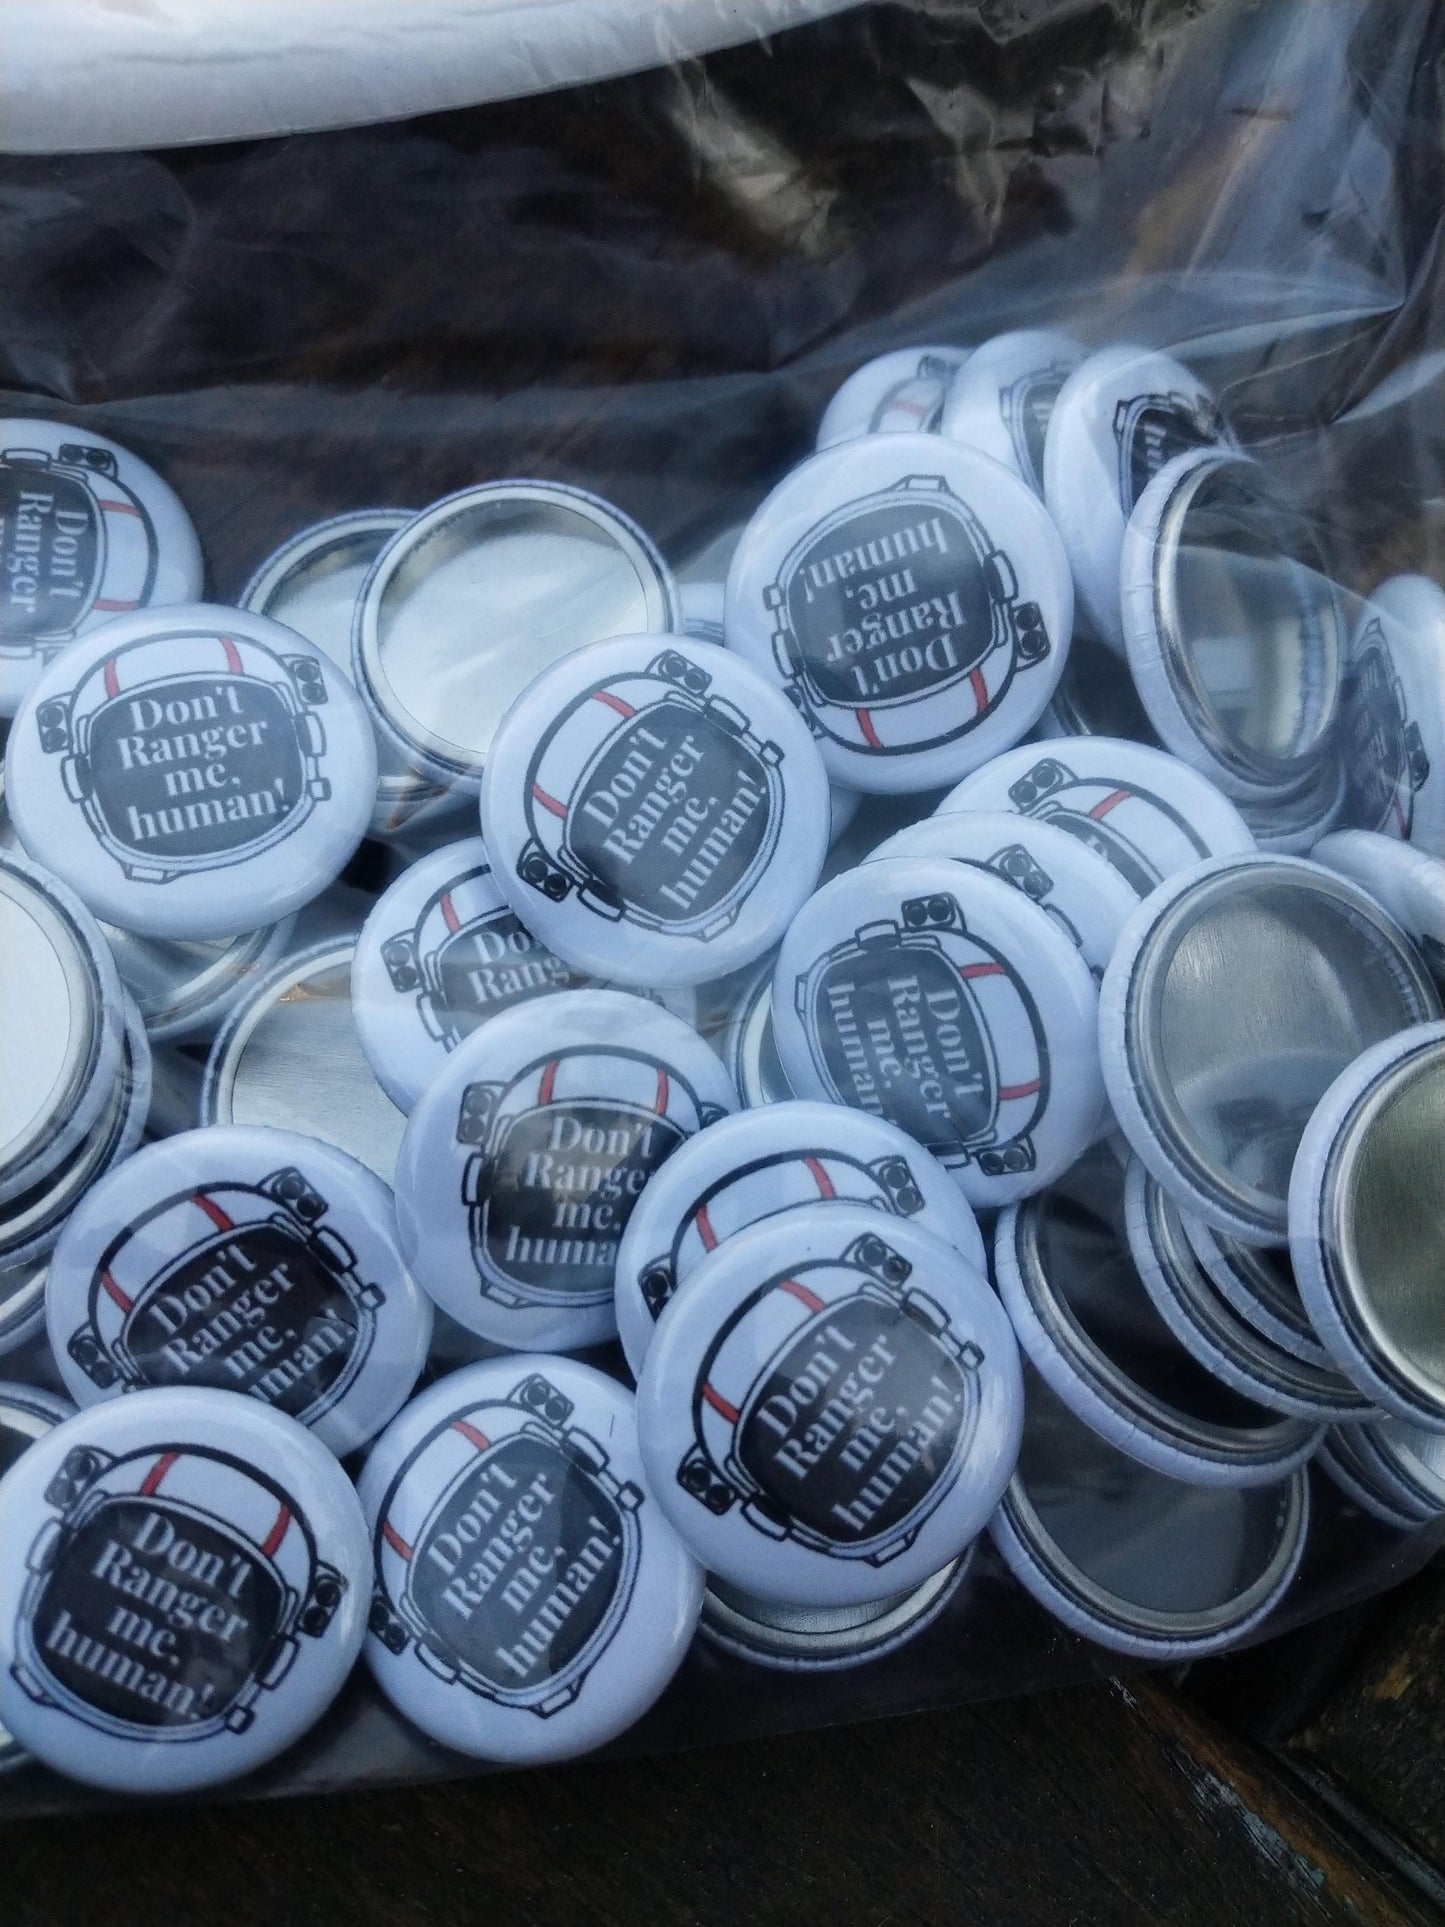 Custom 1" pinback buttons - your custom design on pinback badges - Make your event memorable for less than you'd expect!